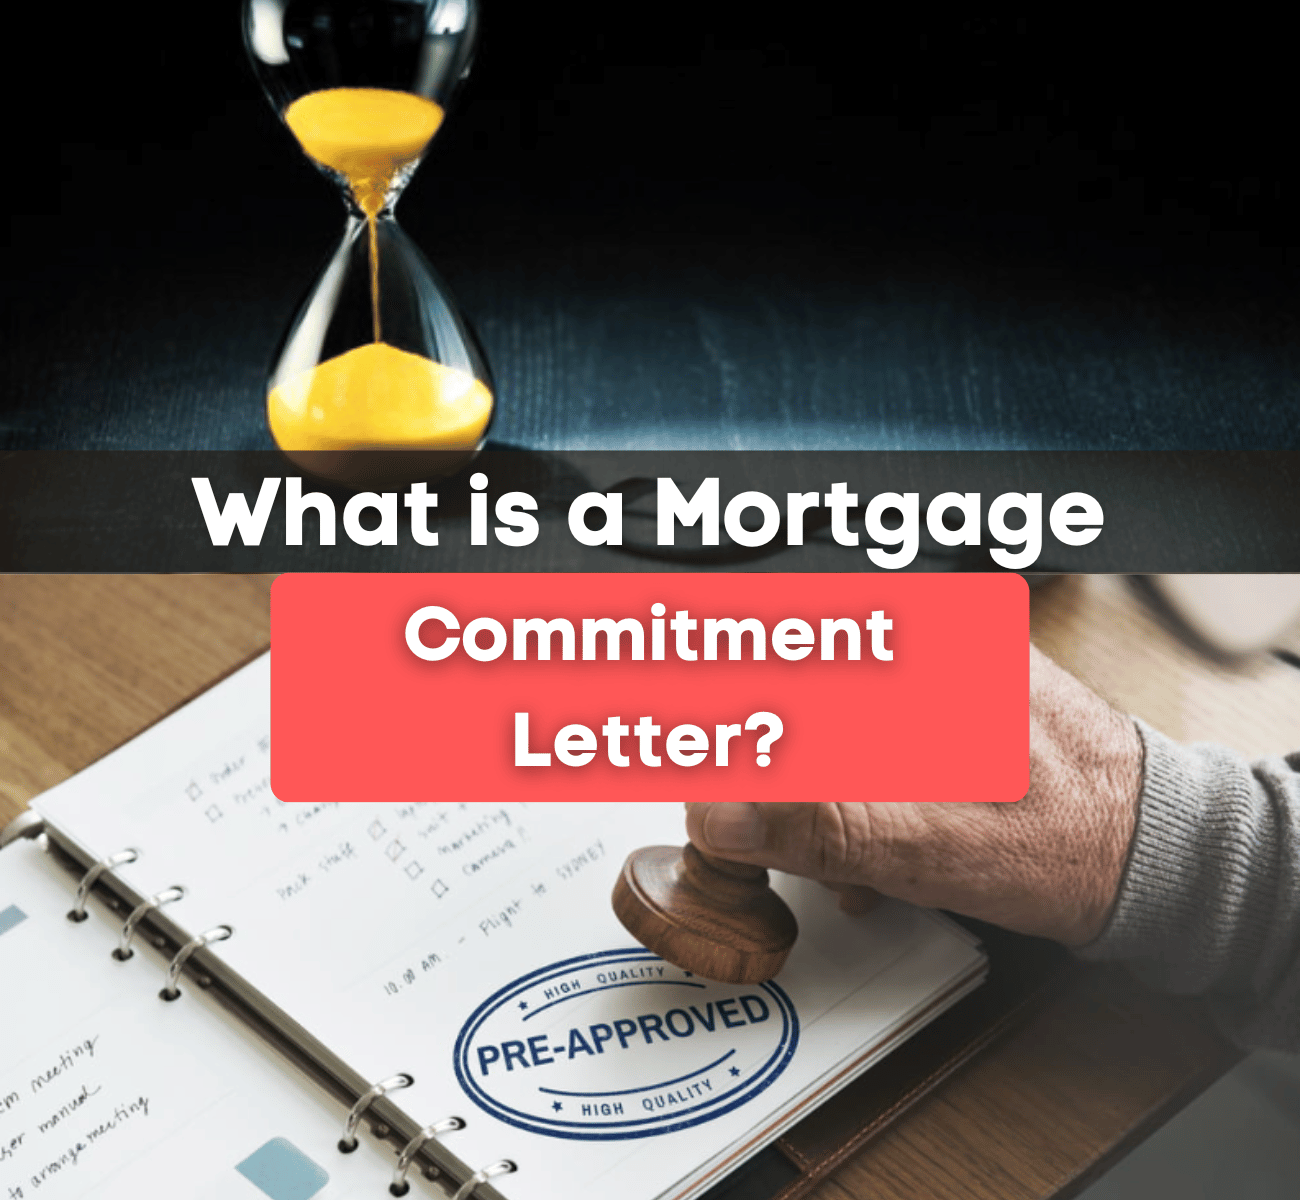 What is a Mortgage Commitment Letter?